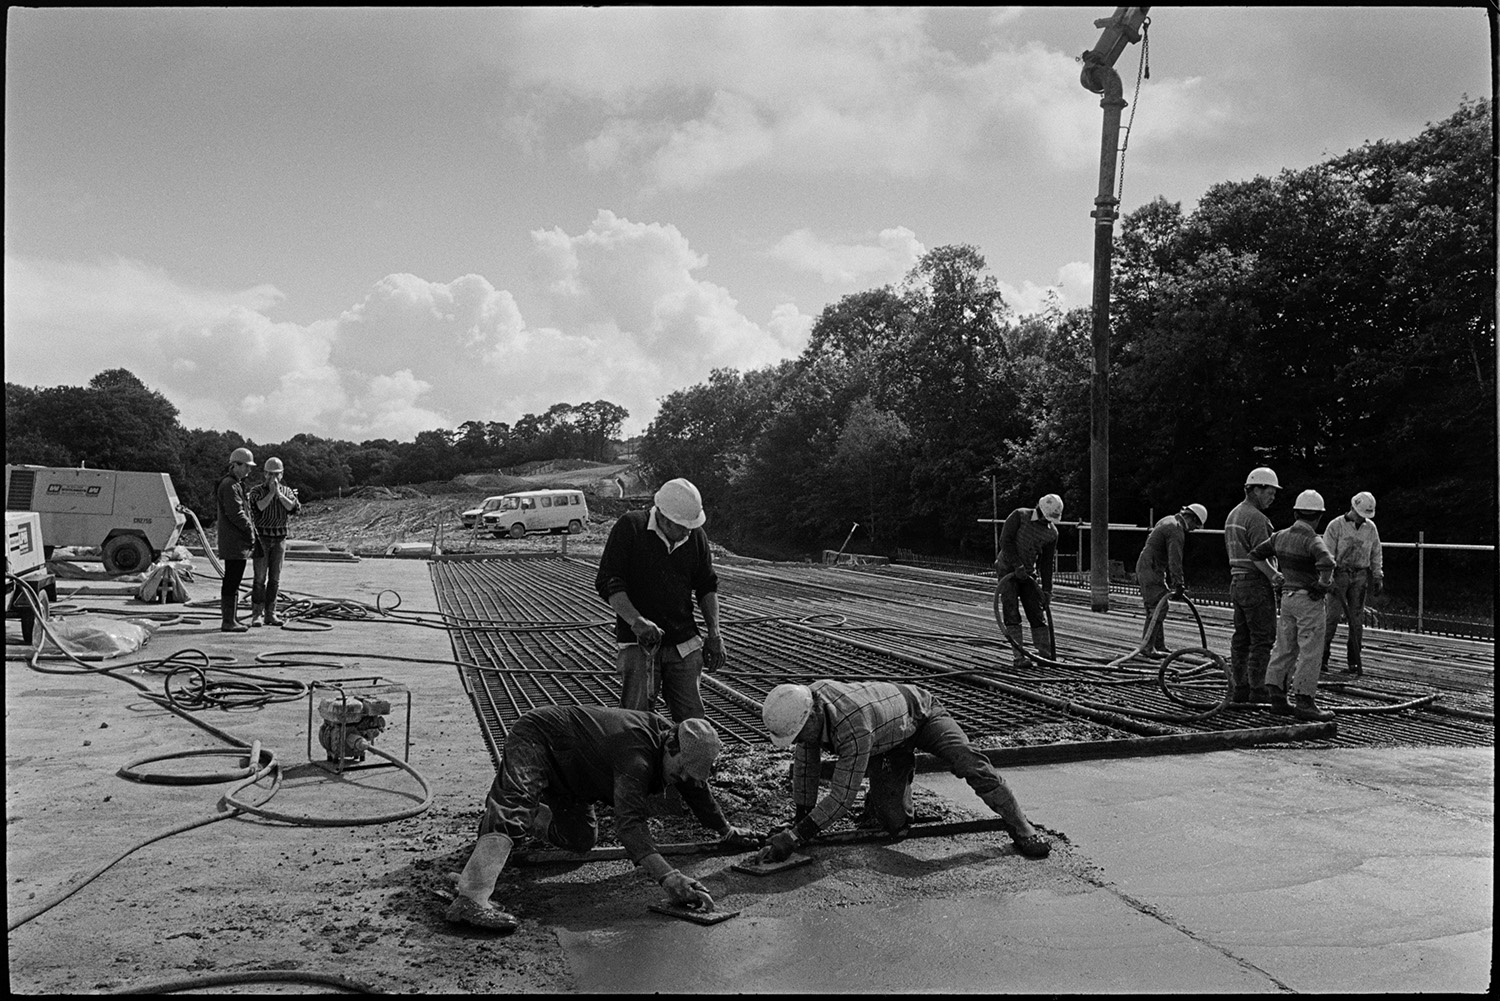 Men building new link road laying cement delivered by crane, laying polythene sheet. 
[Builders levelling newly laid cement over metal mesh on the Devon Link Road or A361 near South Molton. The cement is being delivered by a crane which is  visible by another group of builders on the right.]